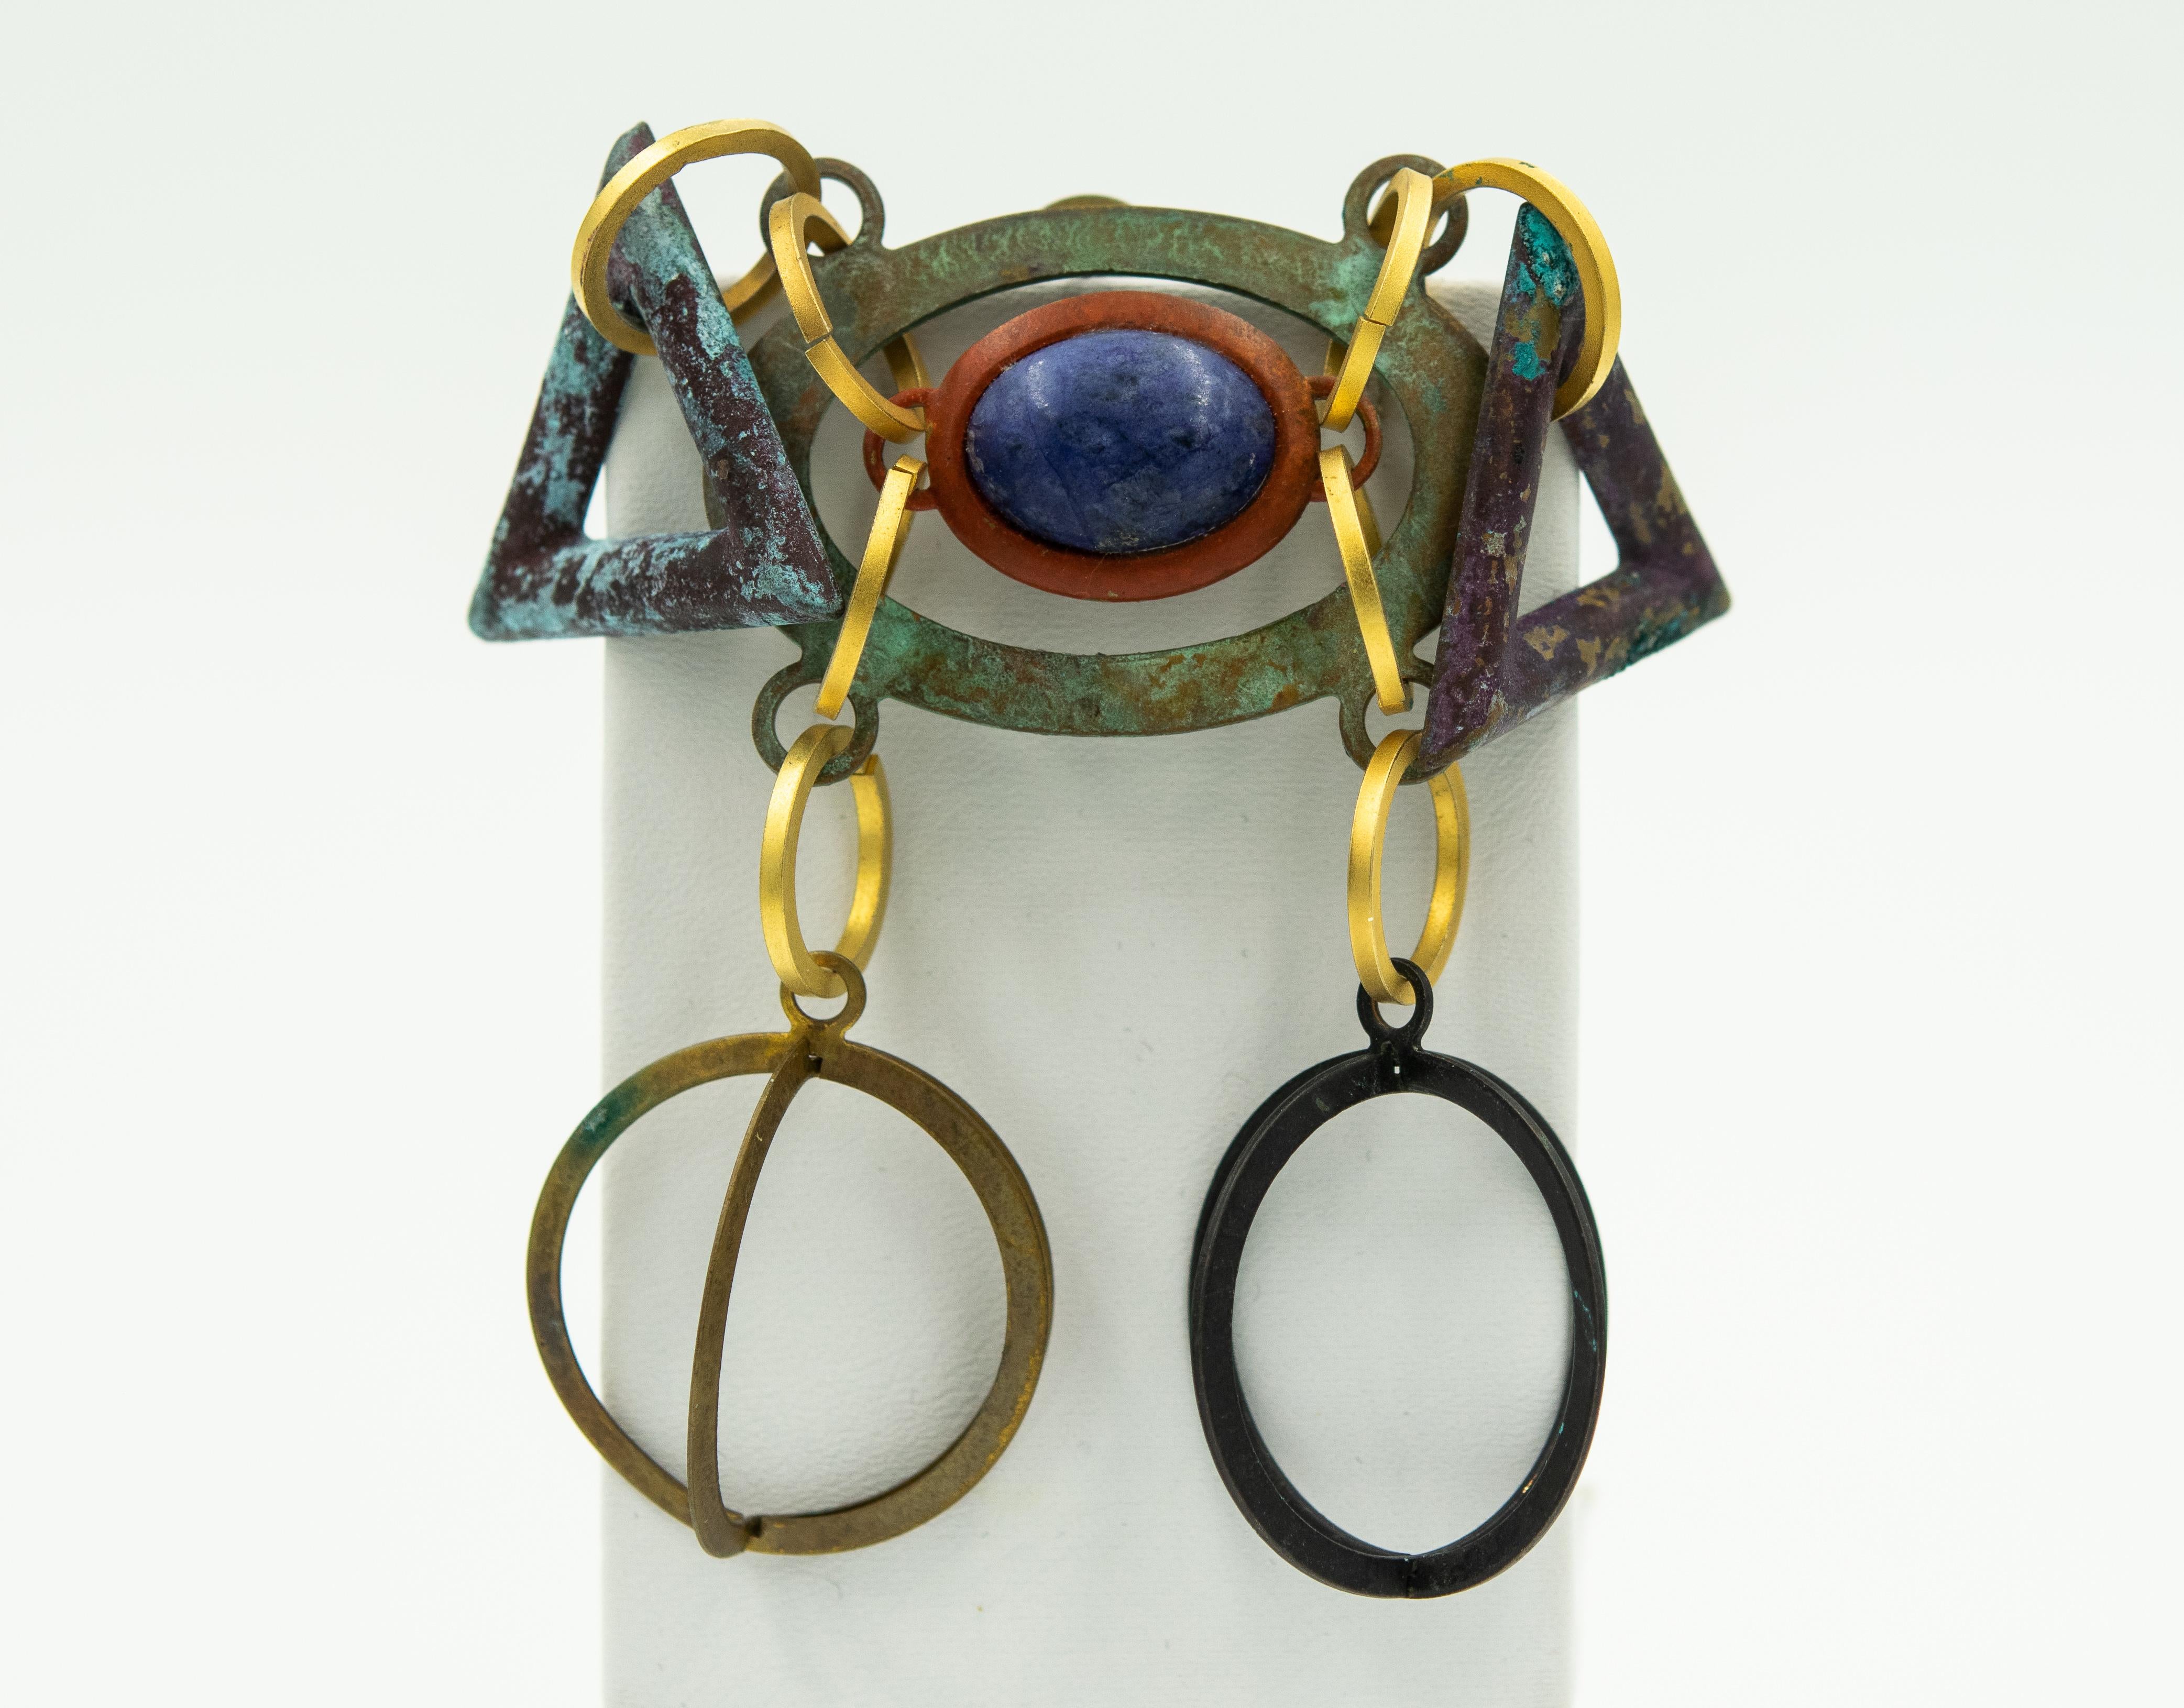 1980s Modernist industrial earrings and brooch by Dannah featuring a dangling mixed metal design with stone accents mostly onyx and chalcedony.  The pieces have tarnished over the years and have a green patina from the copper on some of the pieces.